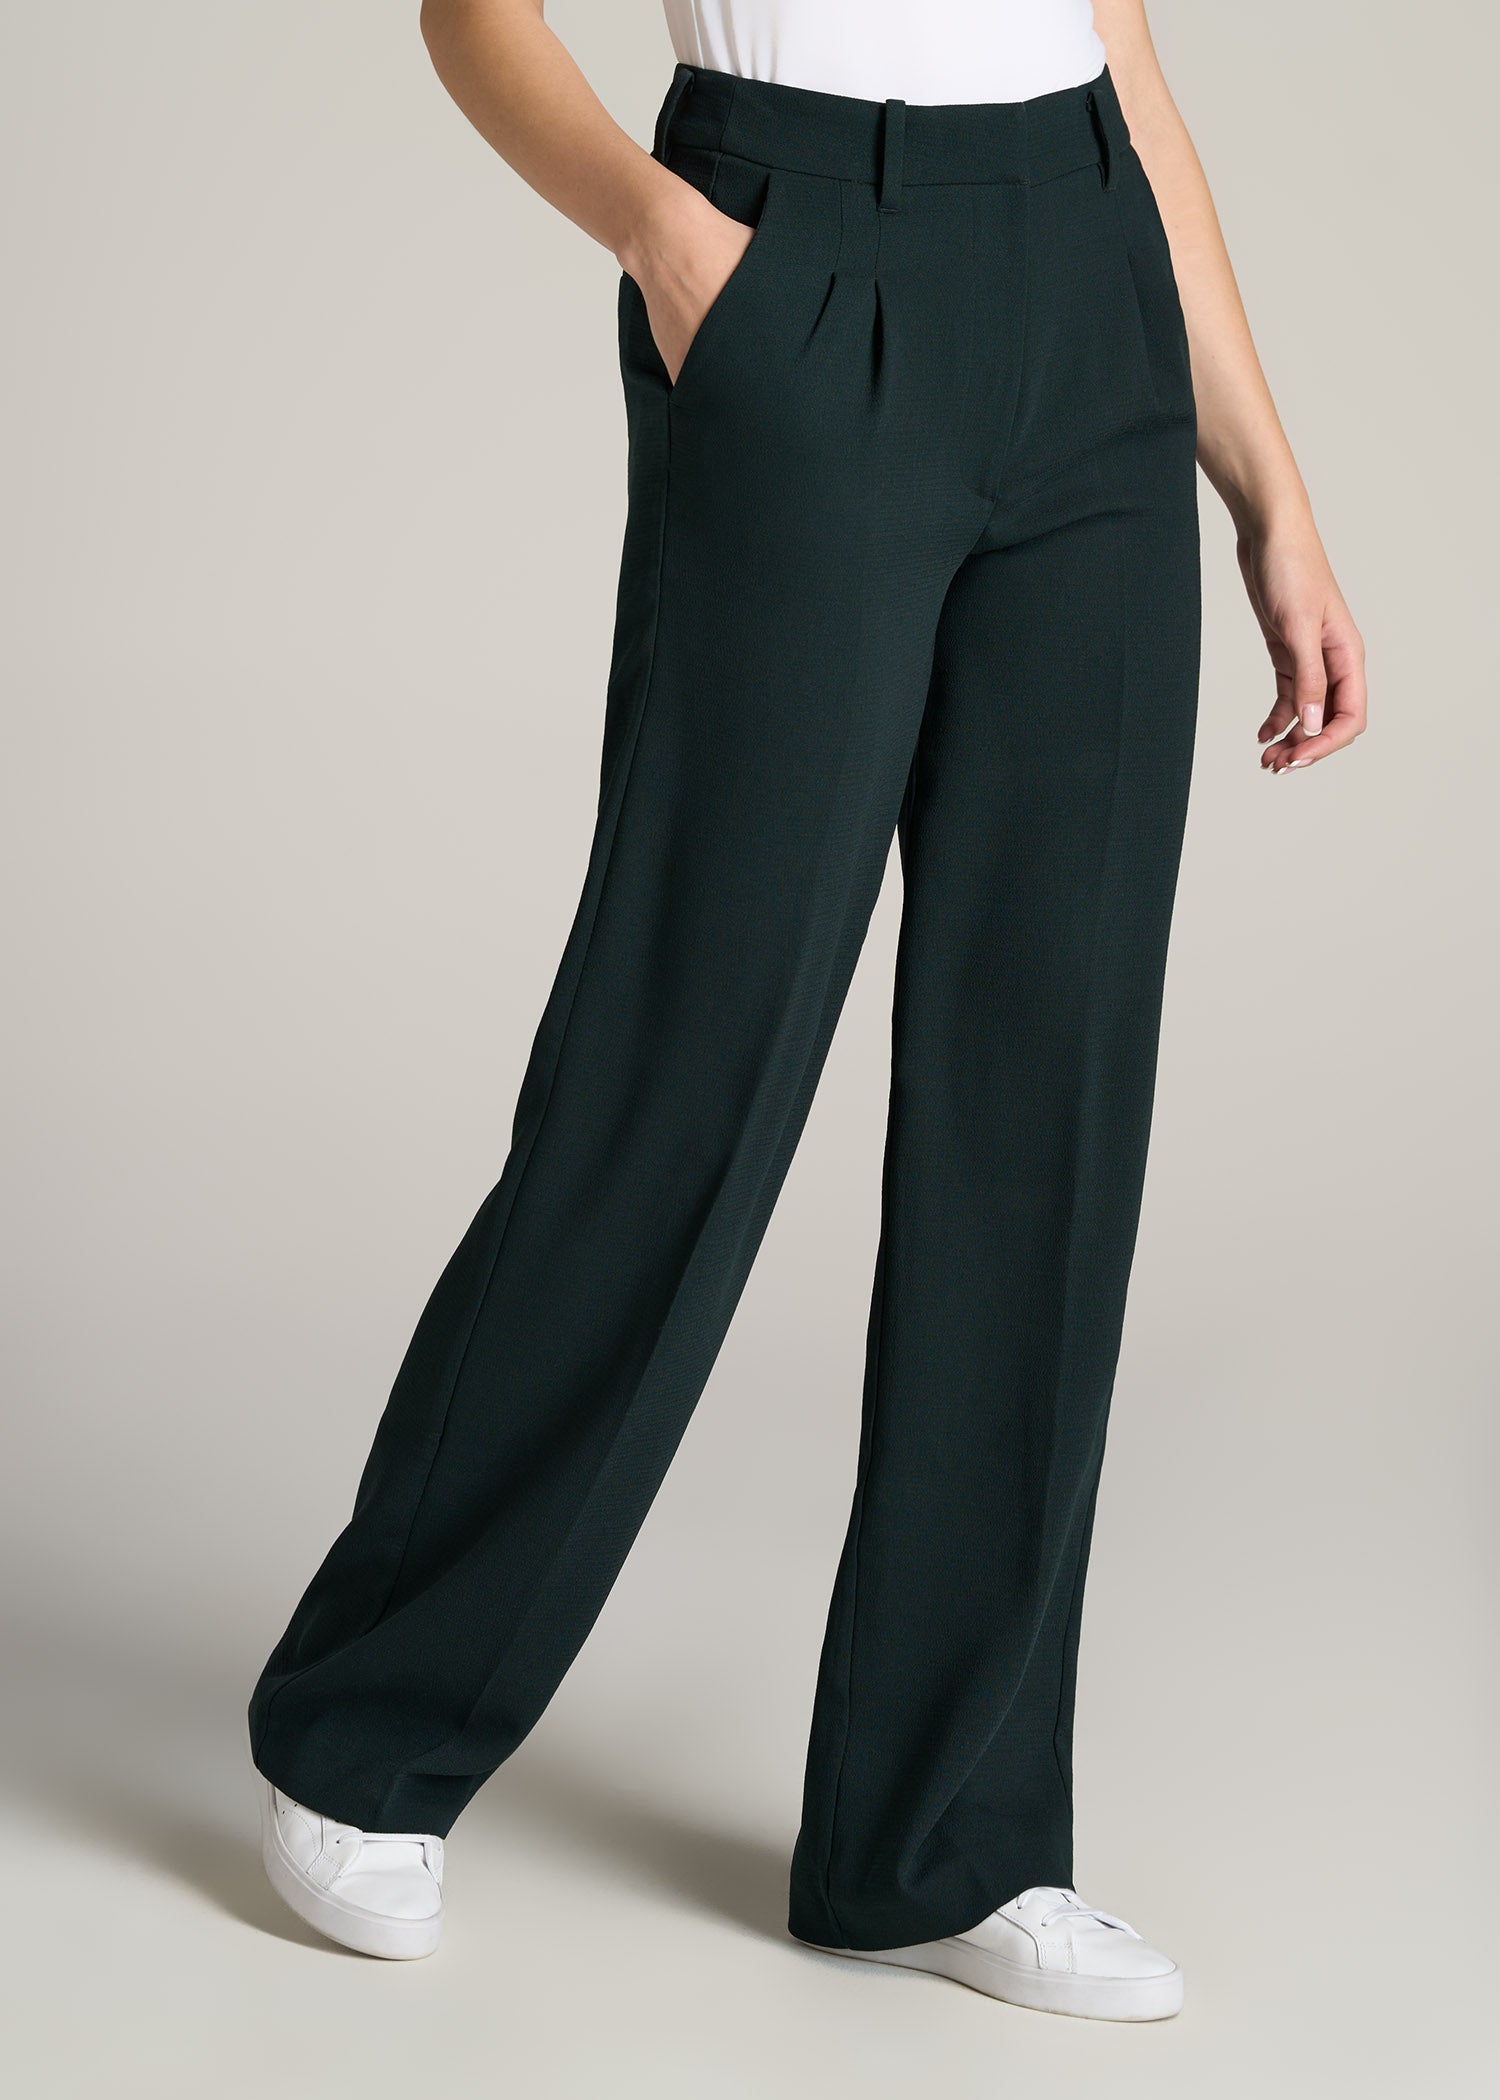 Pleated Dress Pants for Tall Women